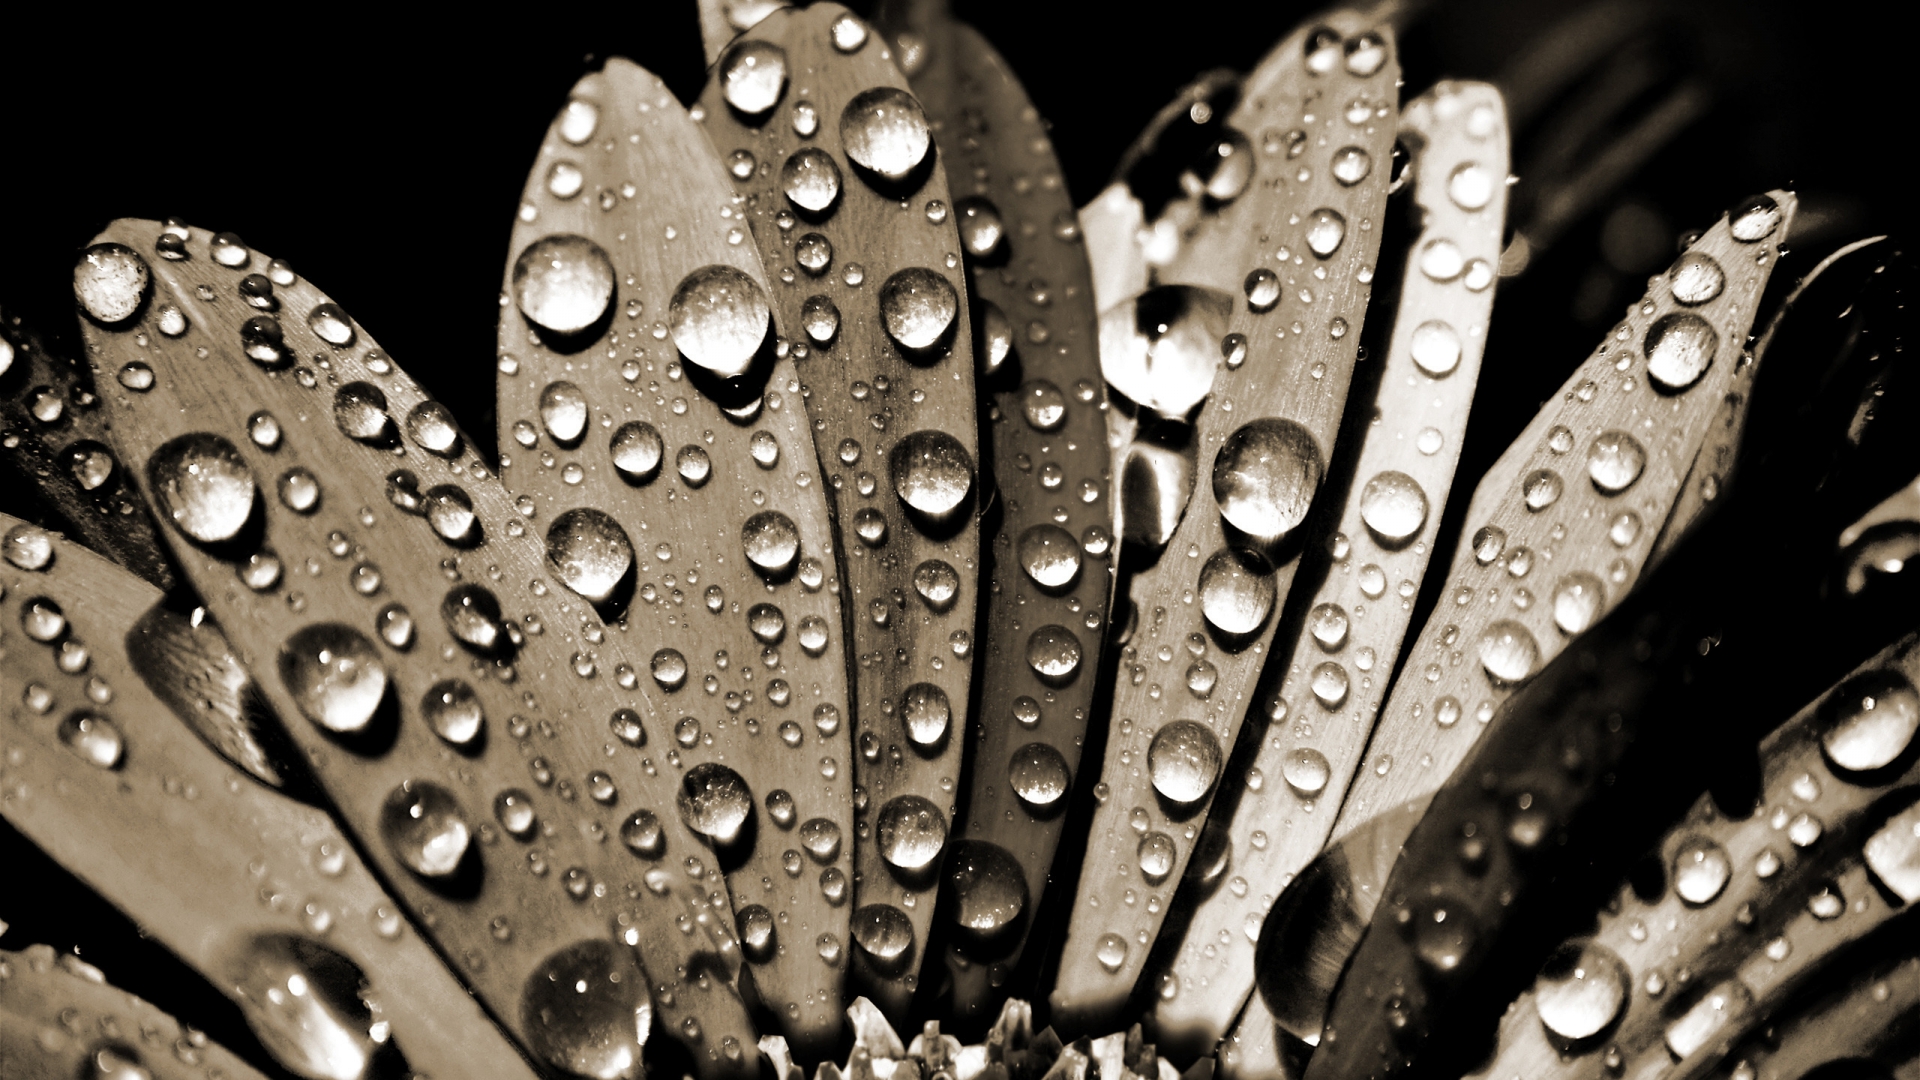 Sepia Water Drops for 1920 x 1080 HDTV 1080p resolution